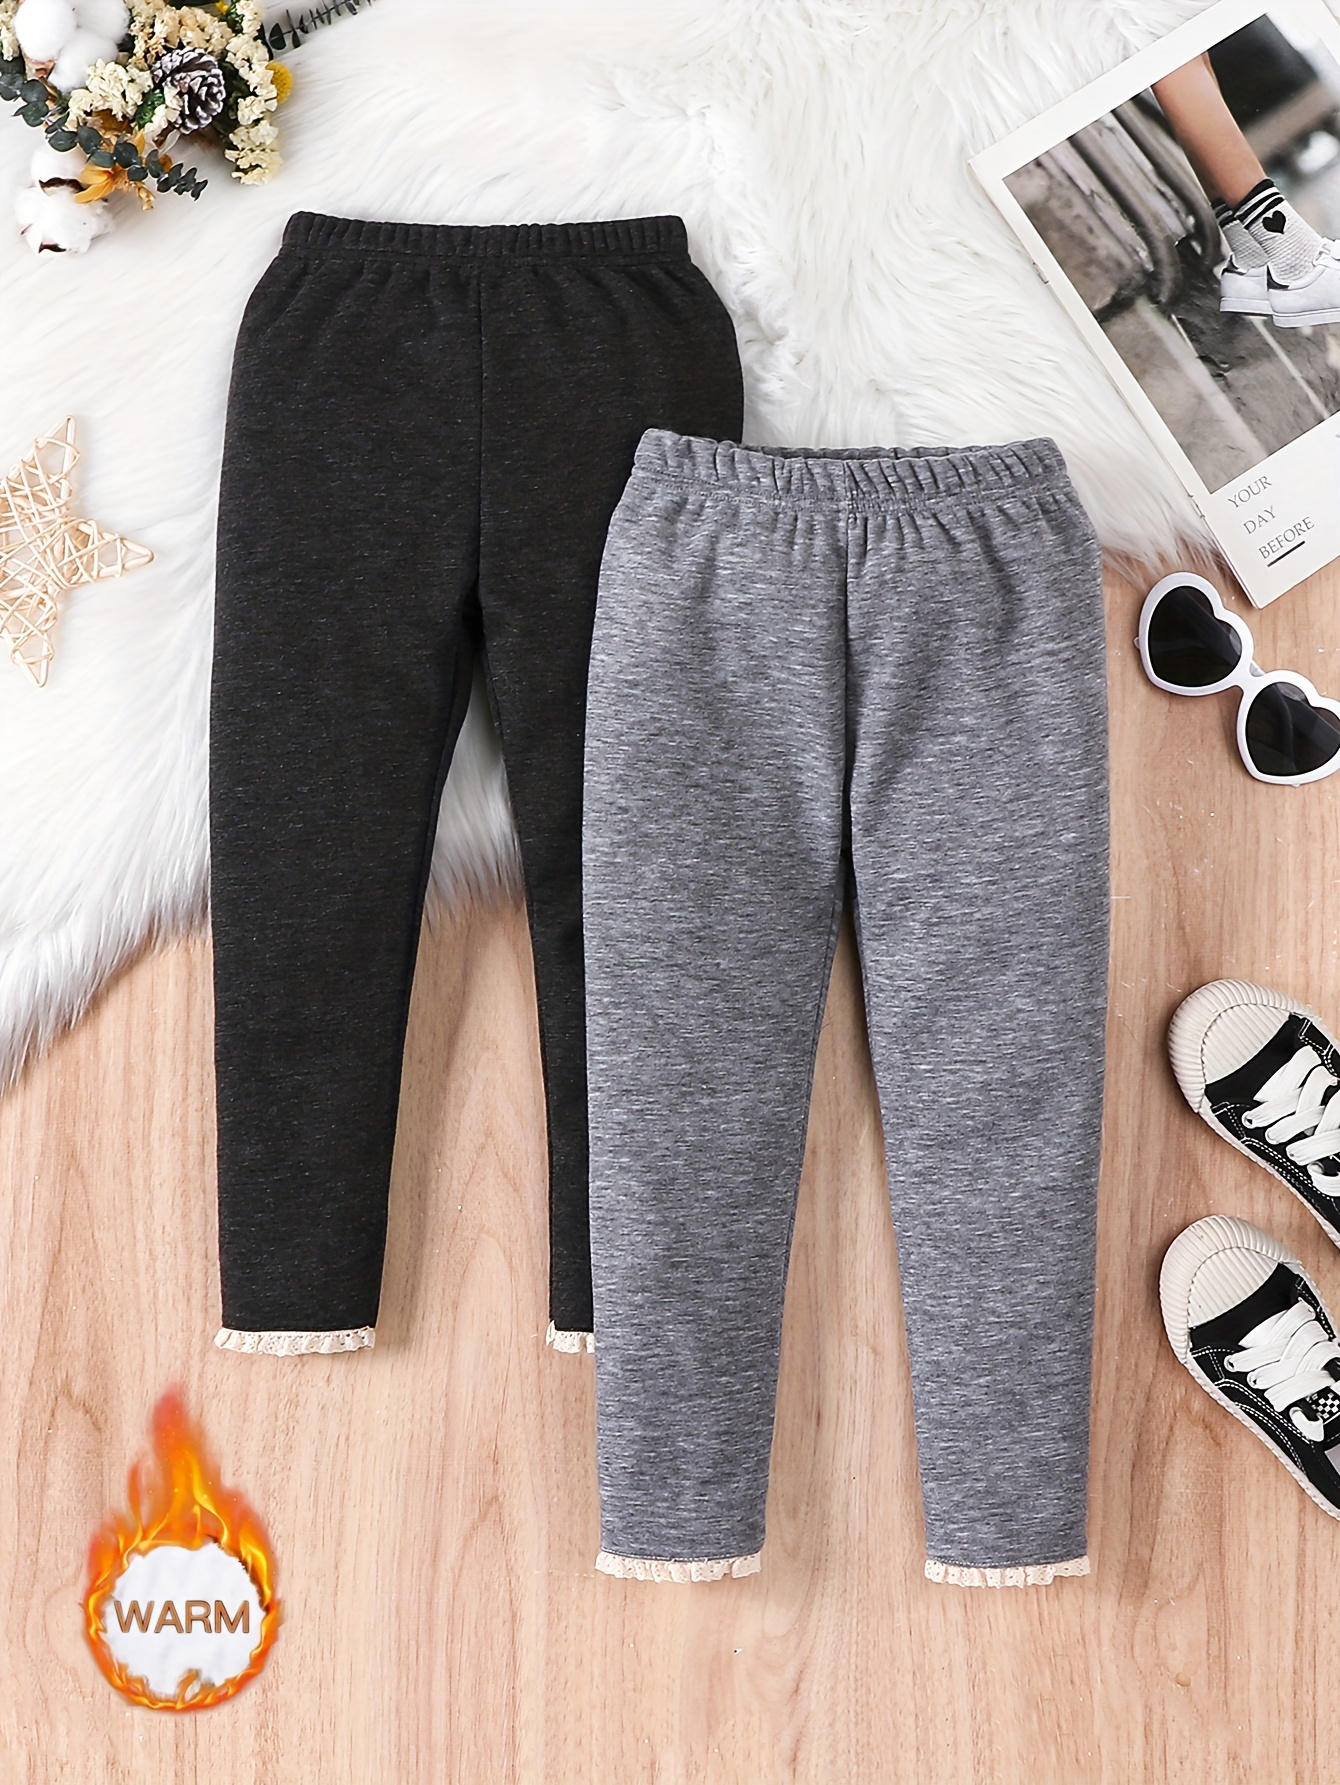 Winter Striped Childrens Thermal Leggings For Women And Kids Thick, Warm,  And Comfortable Home Pants For Boys And Girls Ages 2 18 Teen And Child  Clothes Included L231005 From Bingcoholnciaga, $5.19